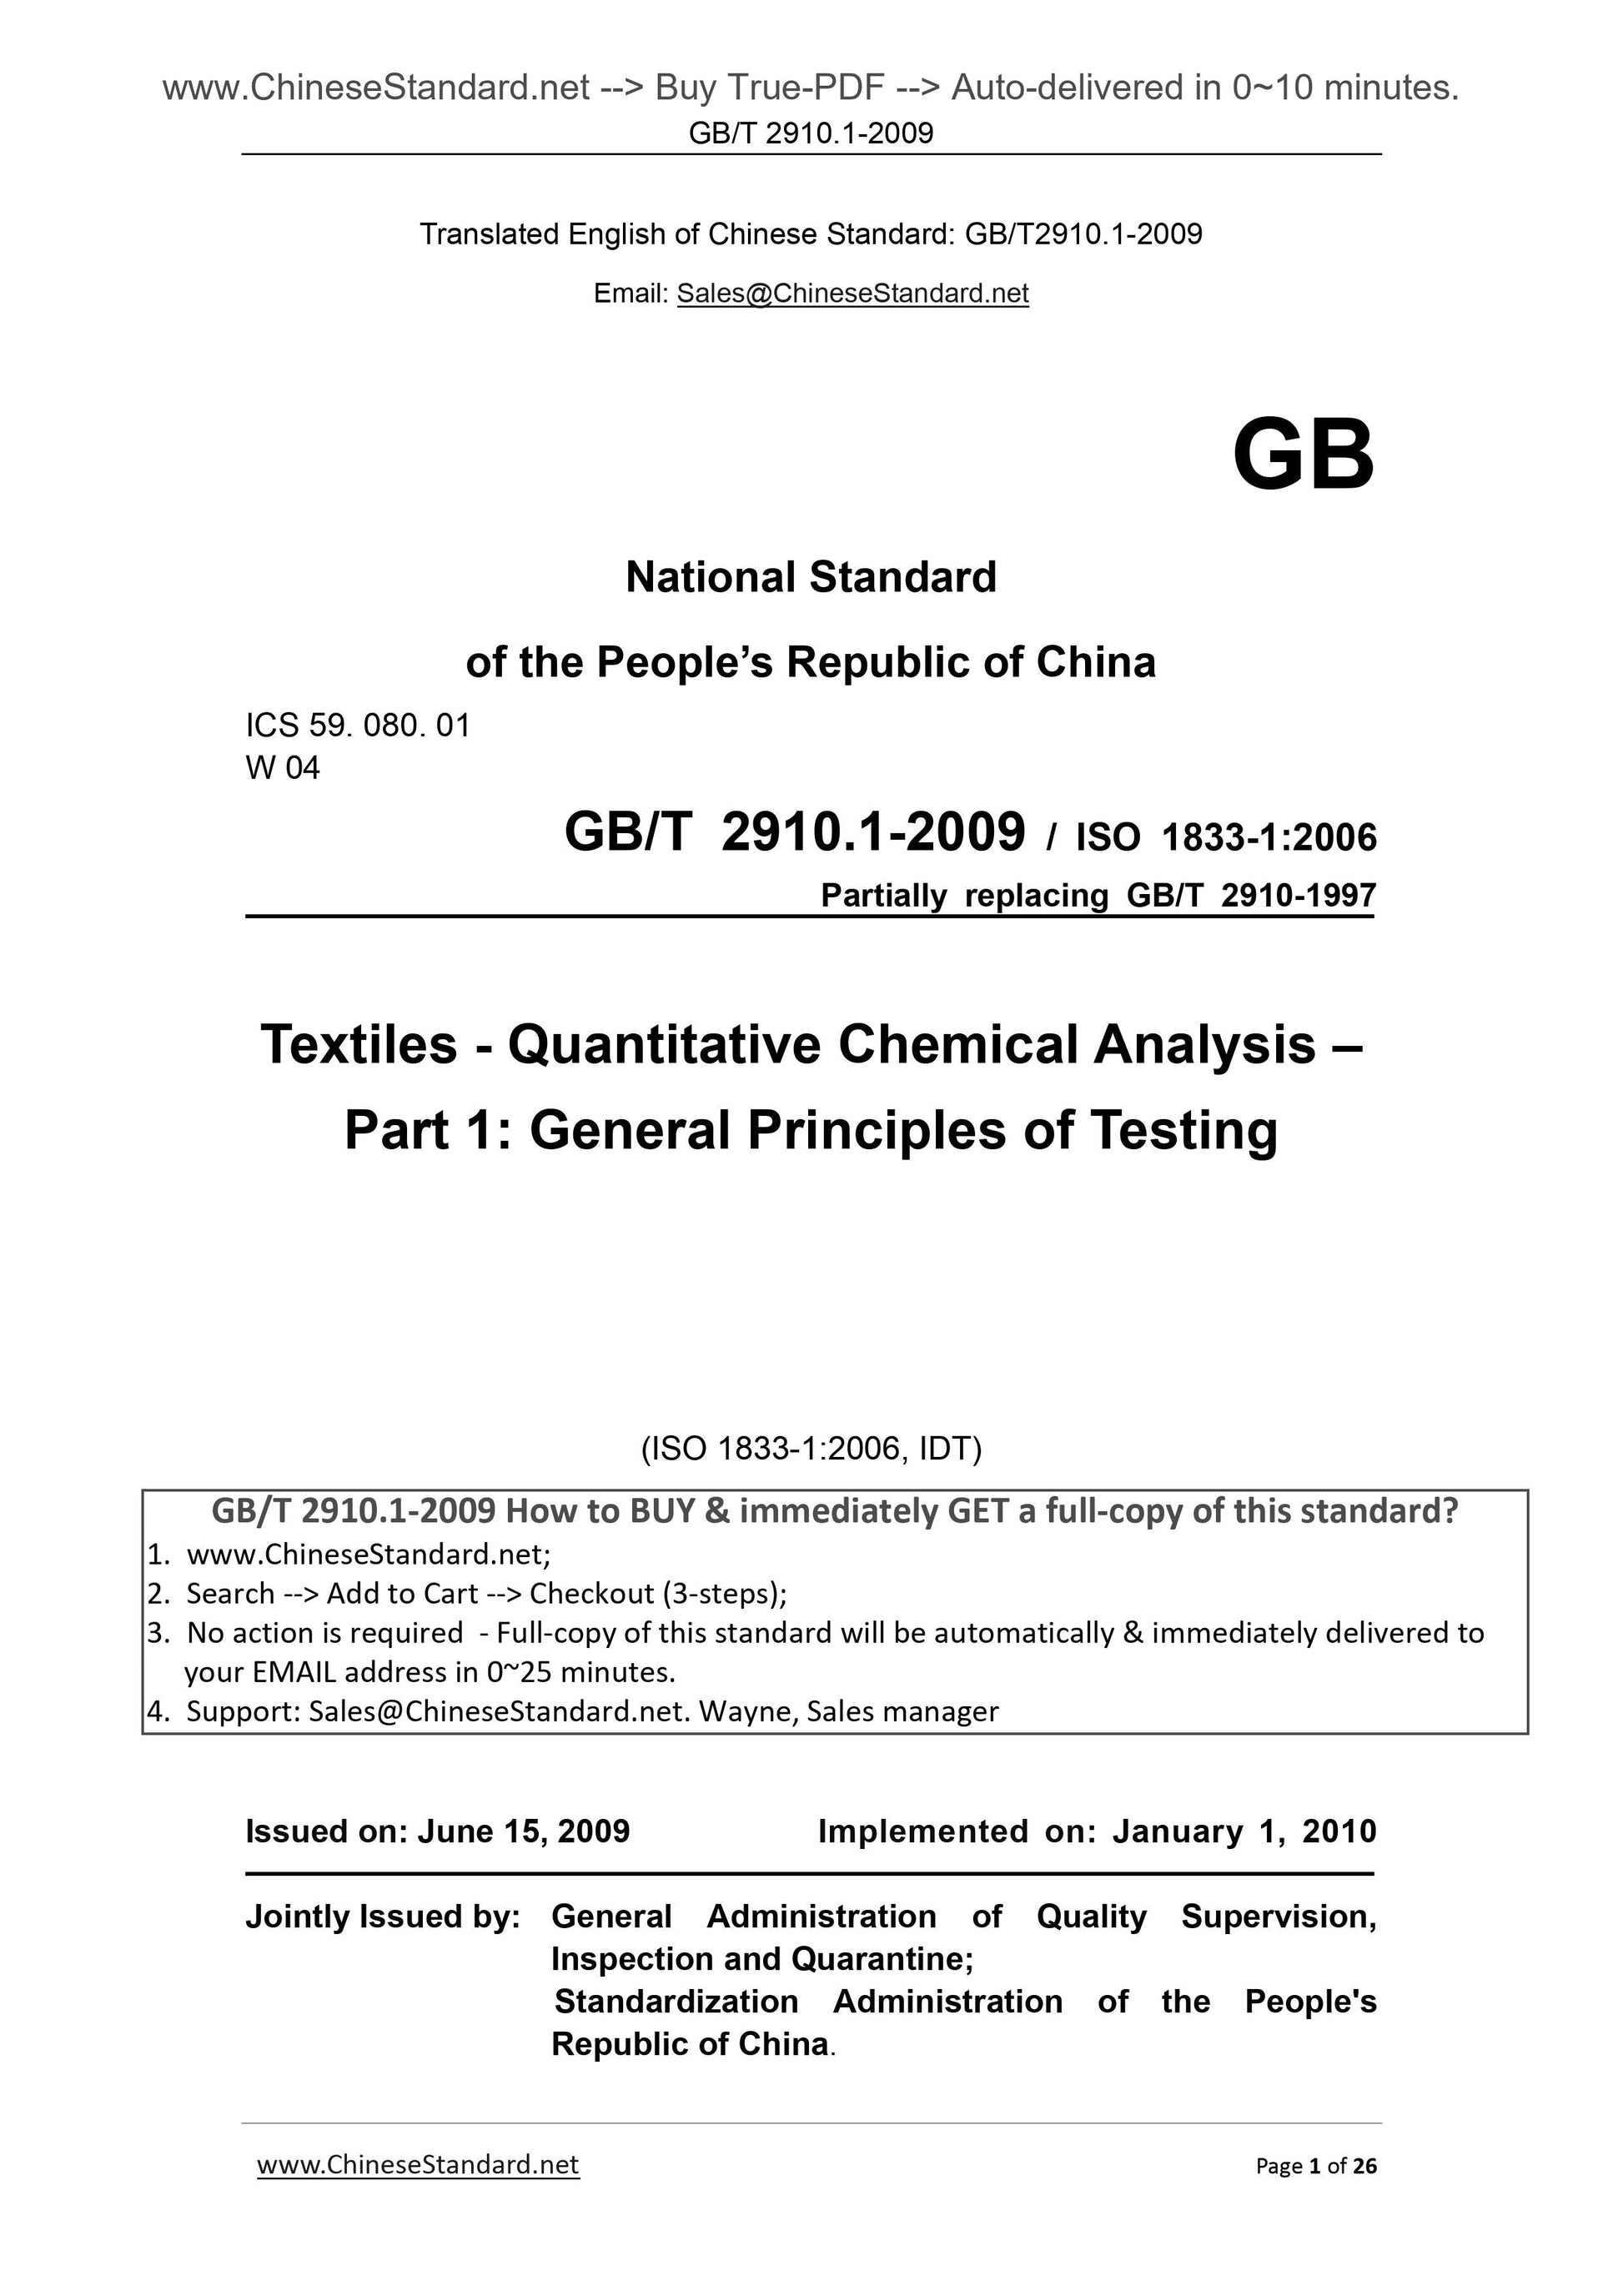 GB/T 2910.1-2009 Page 1